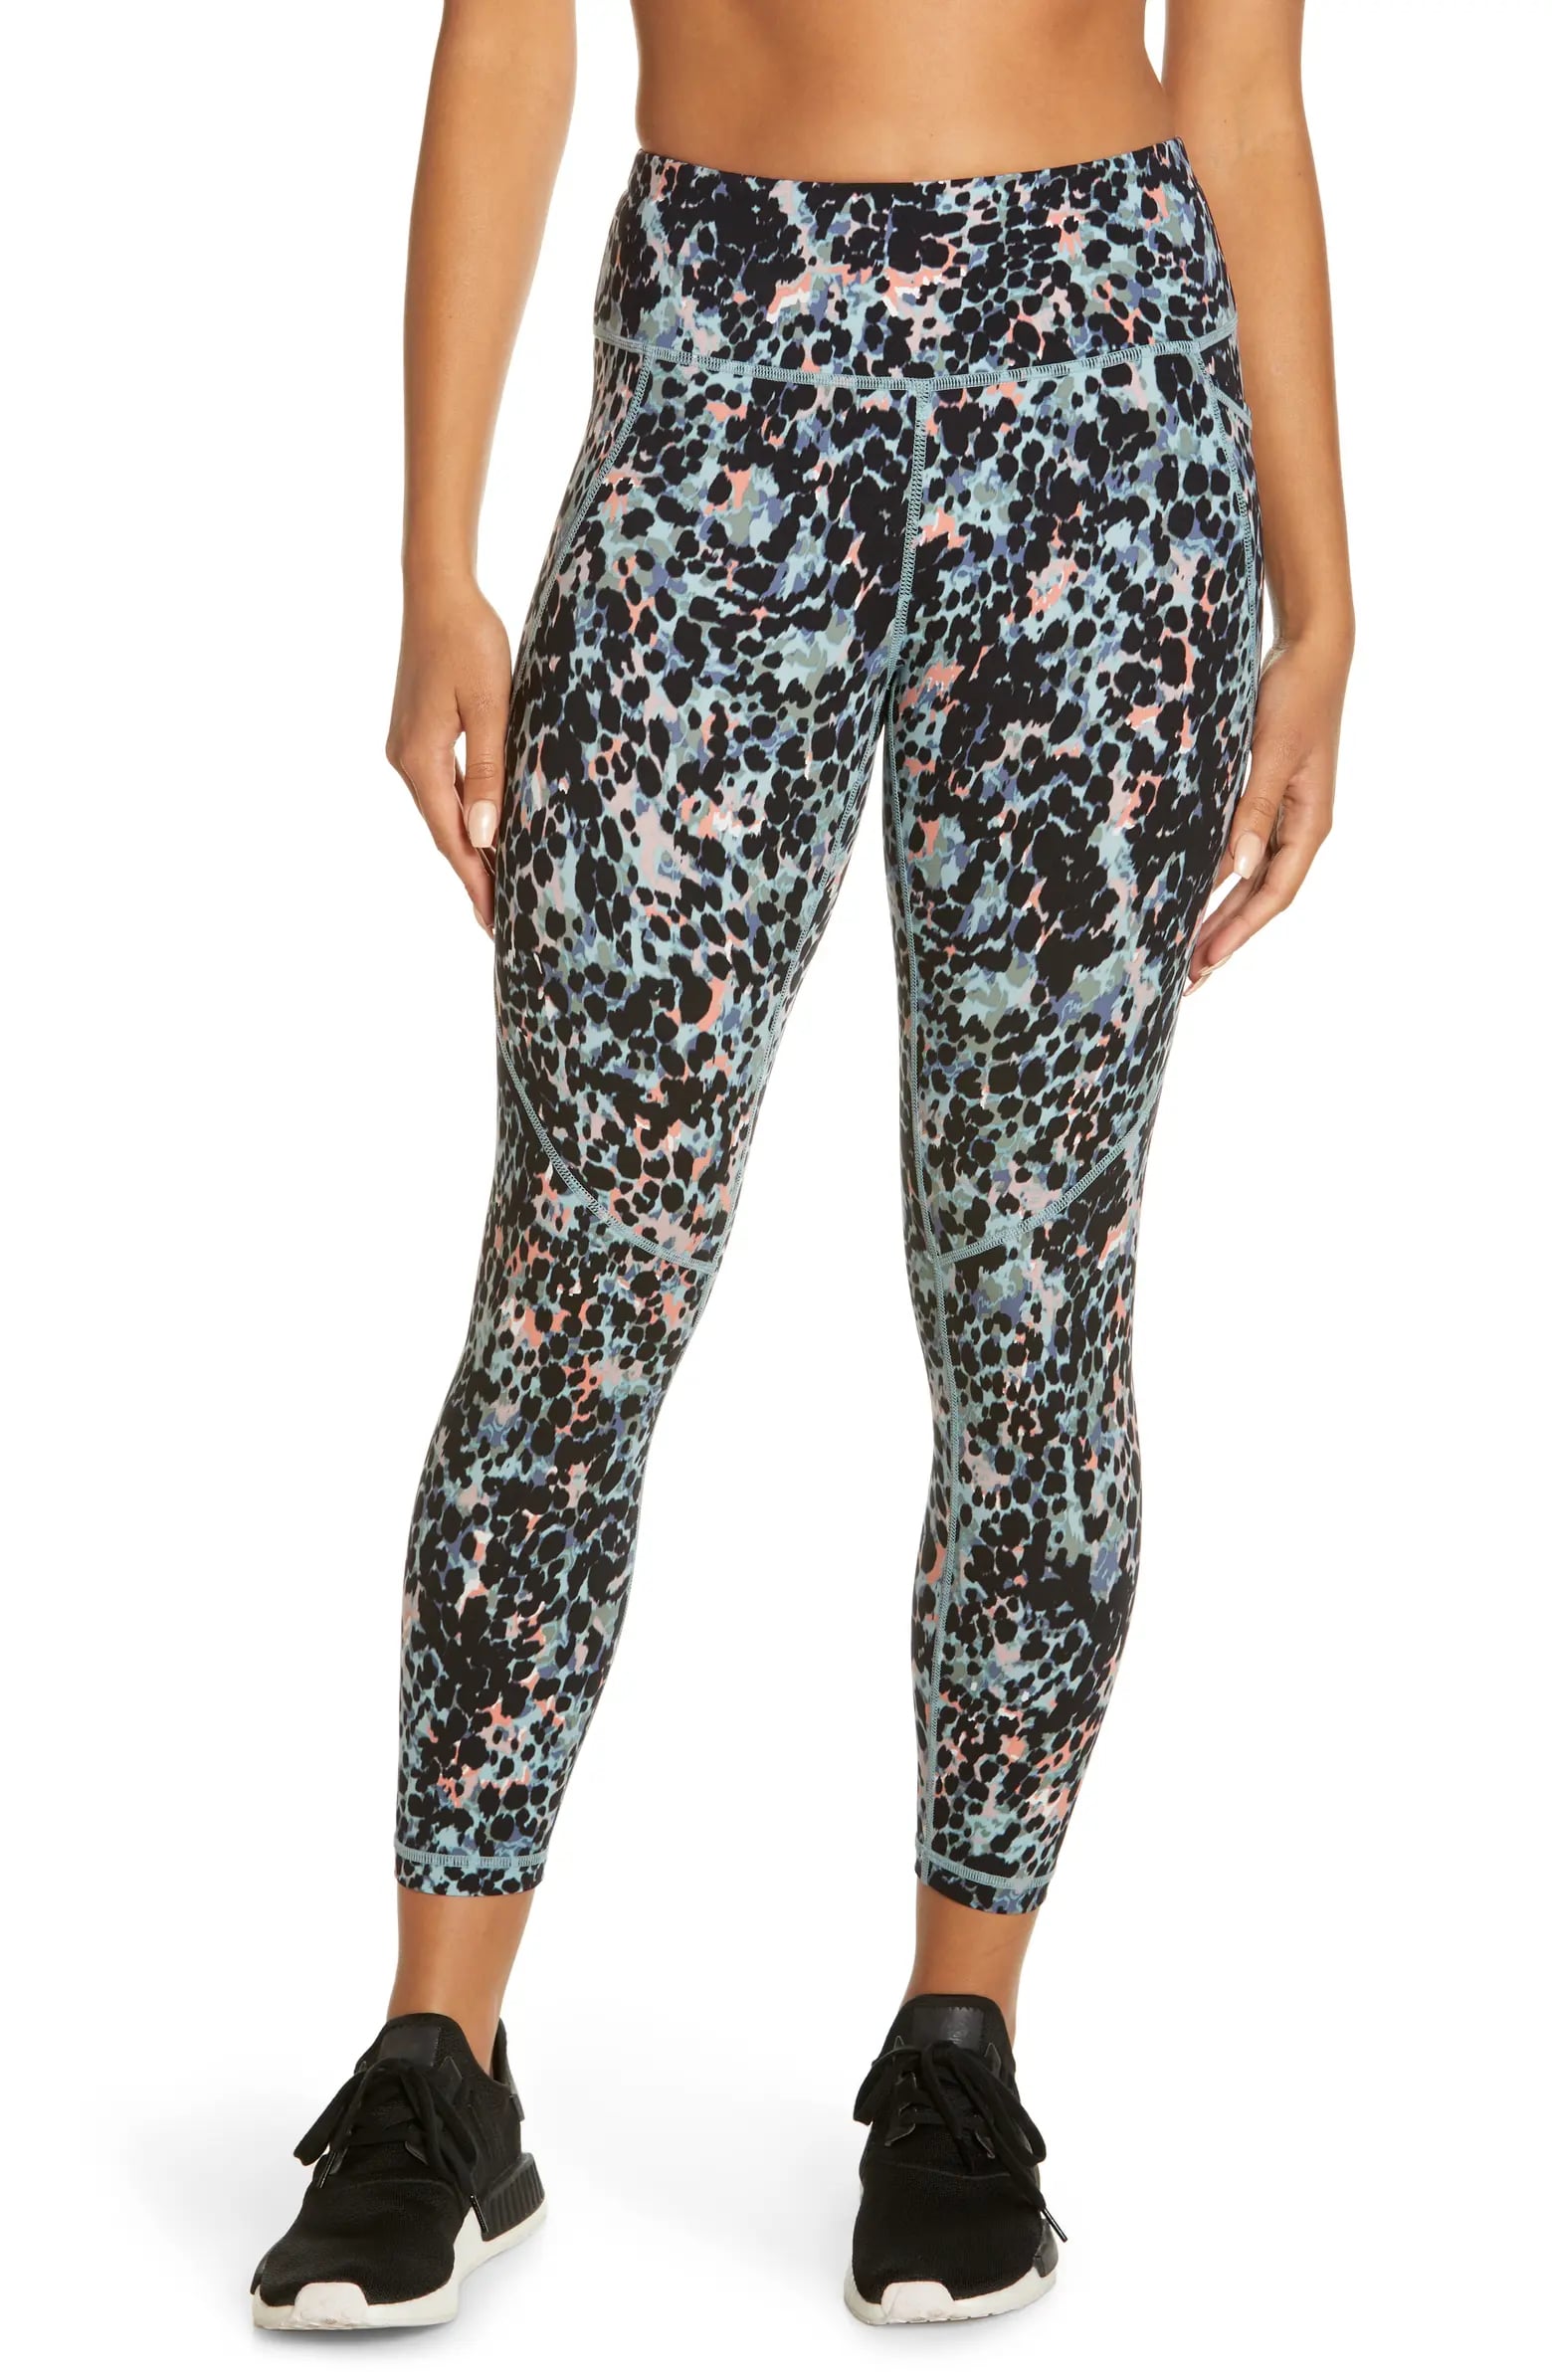 Nordstrom Sweaty Betty Leggings Are Already Selling Out